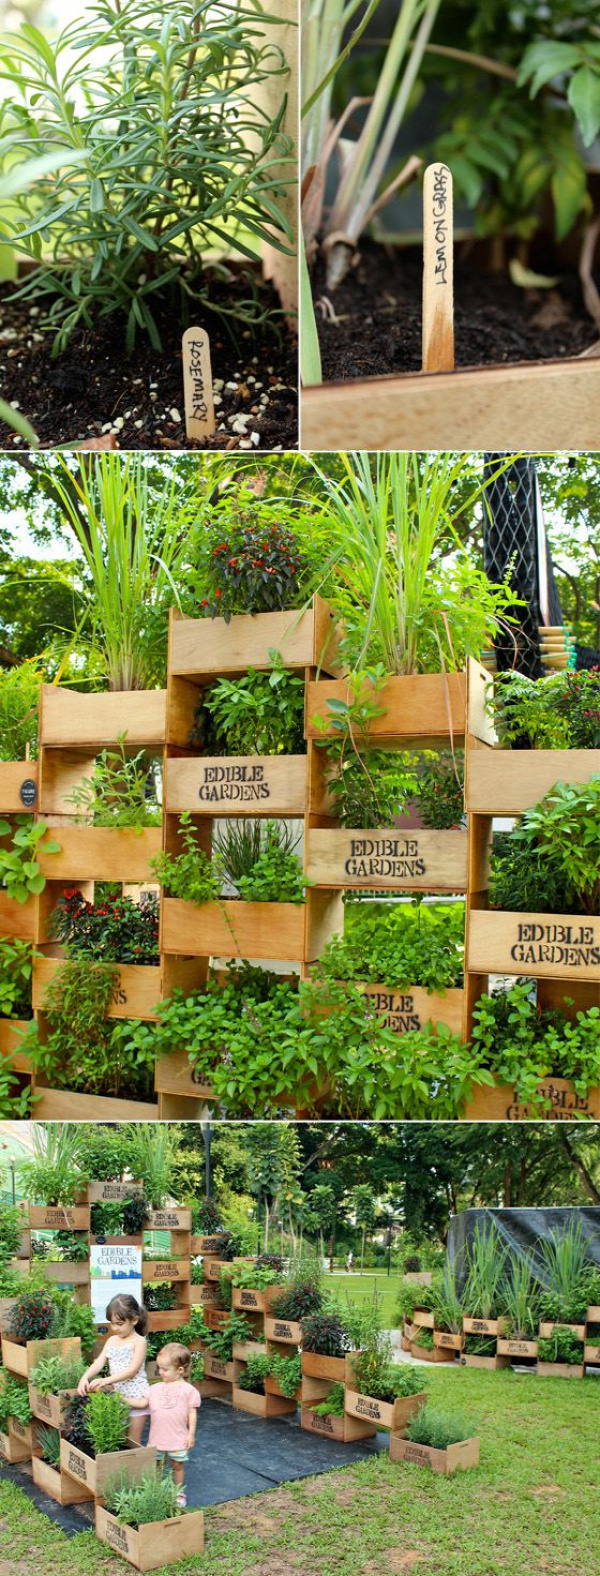 Who says you don't have any room for an herb garden. could make a gorgeous living wall/divider for privacy